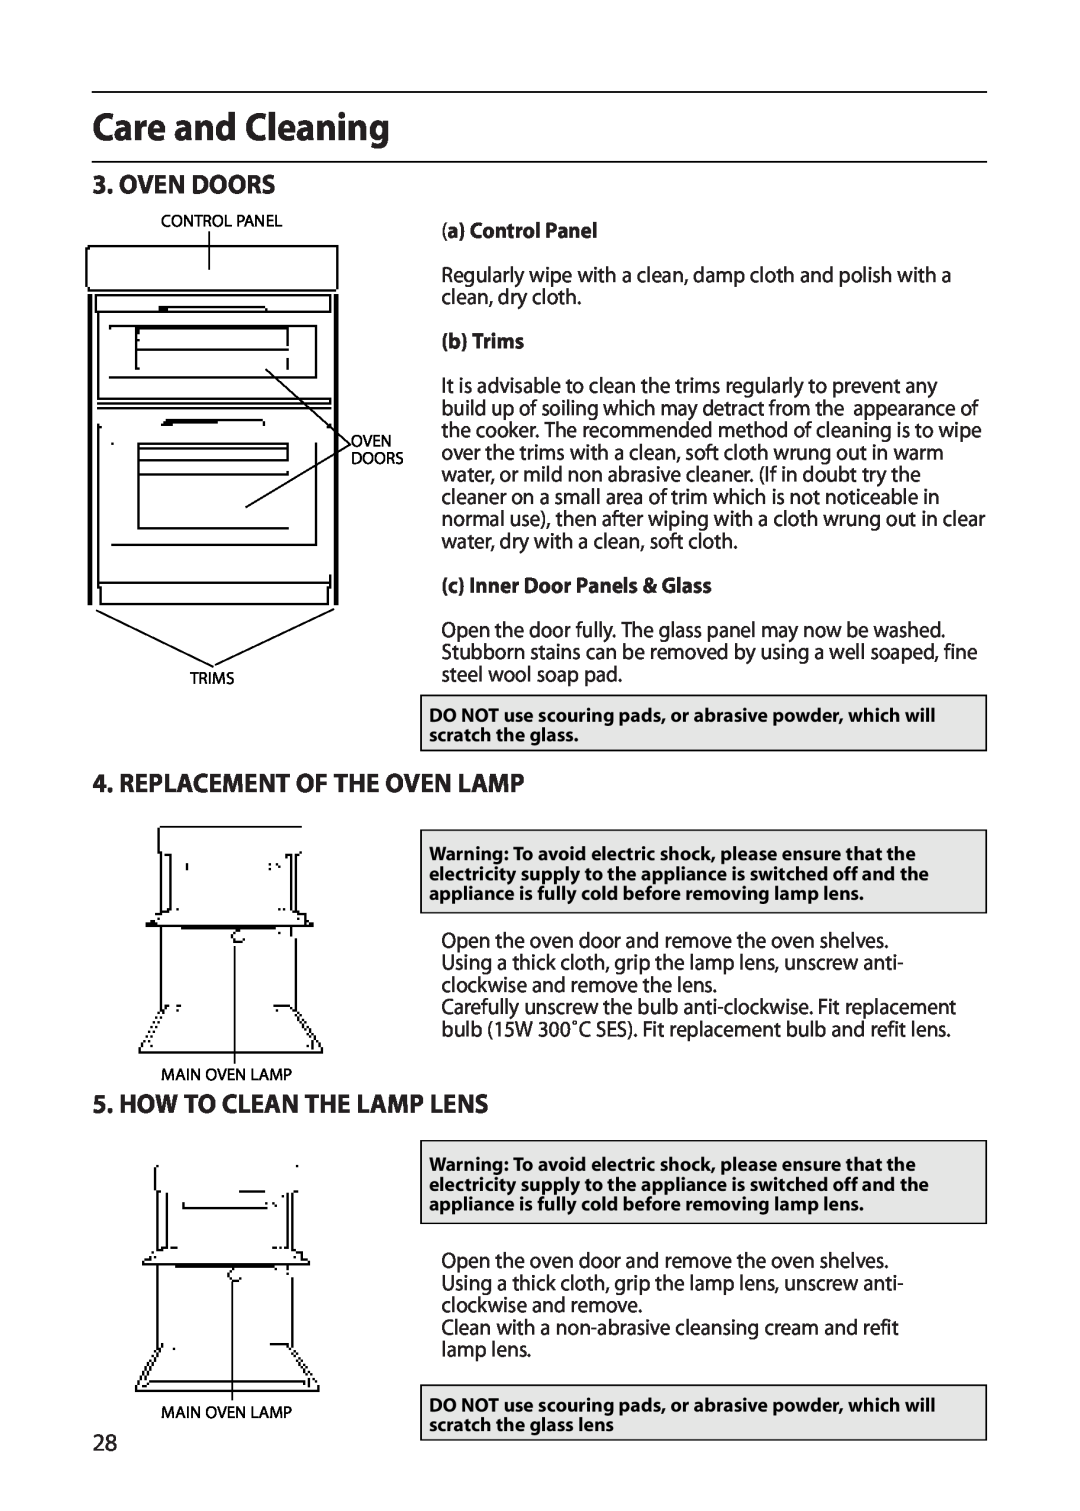 Indesit FDU20 Care and Cleaning, Oven Doors, Replacement Of The Oven Lamp, How To Clean The Lamp Lens, a Control Panel 